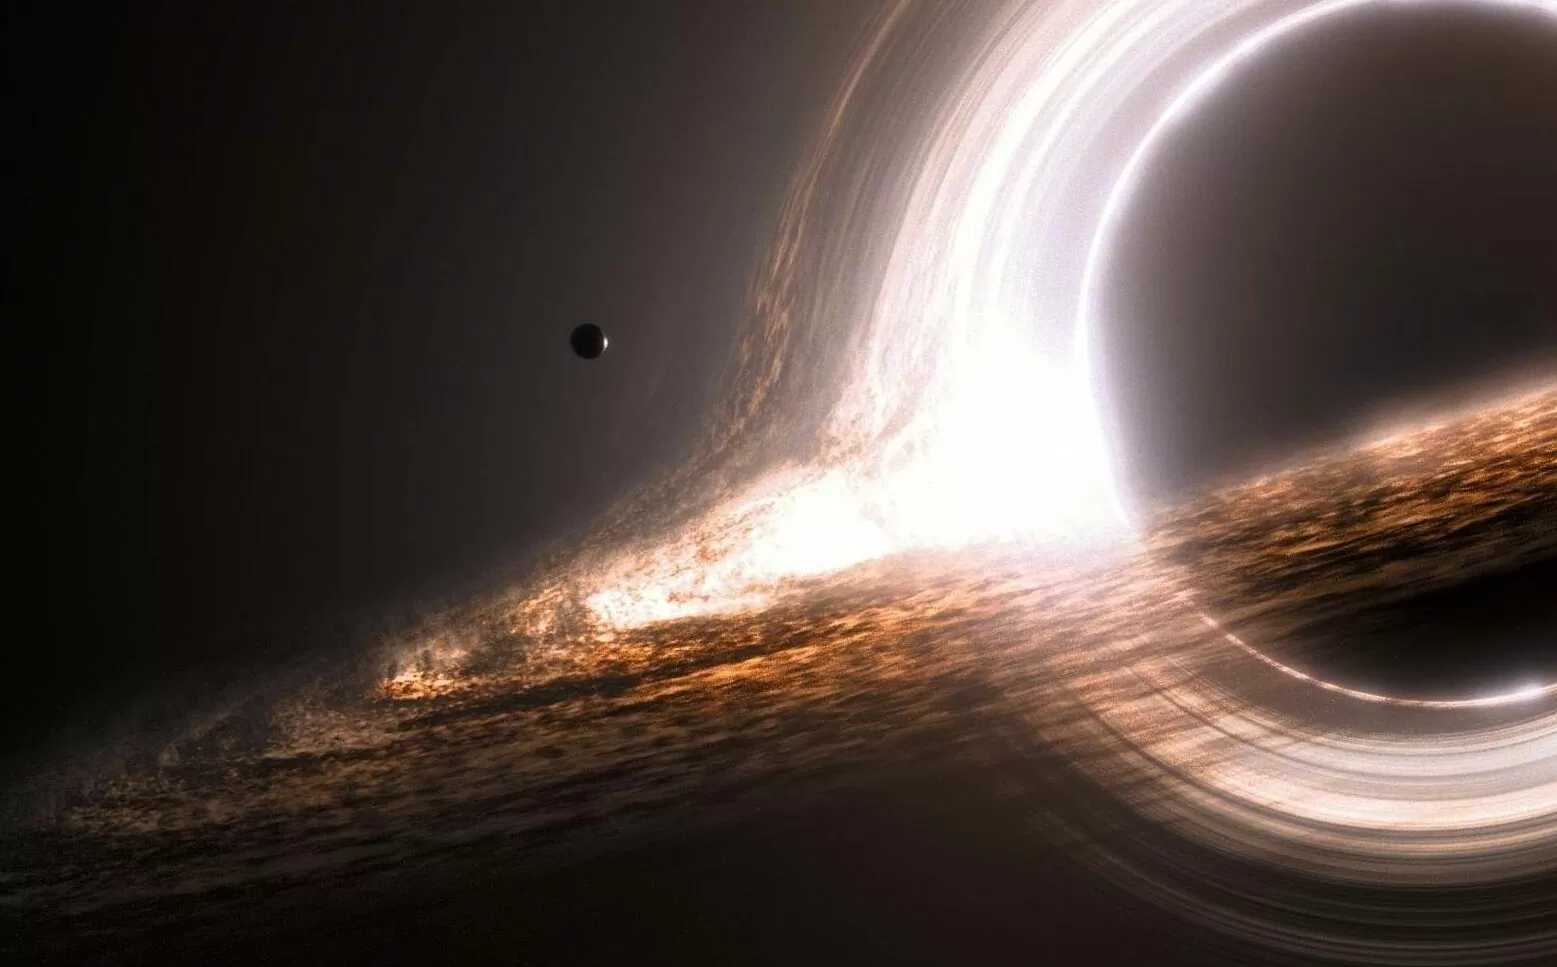 Astrophysicist told what will happen if you fall into a black hole